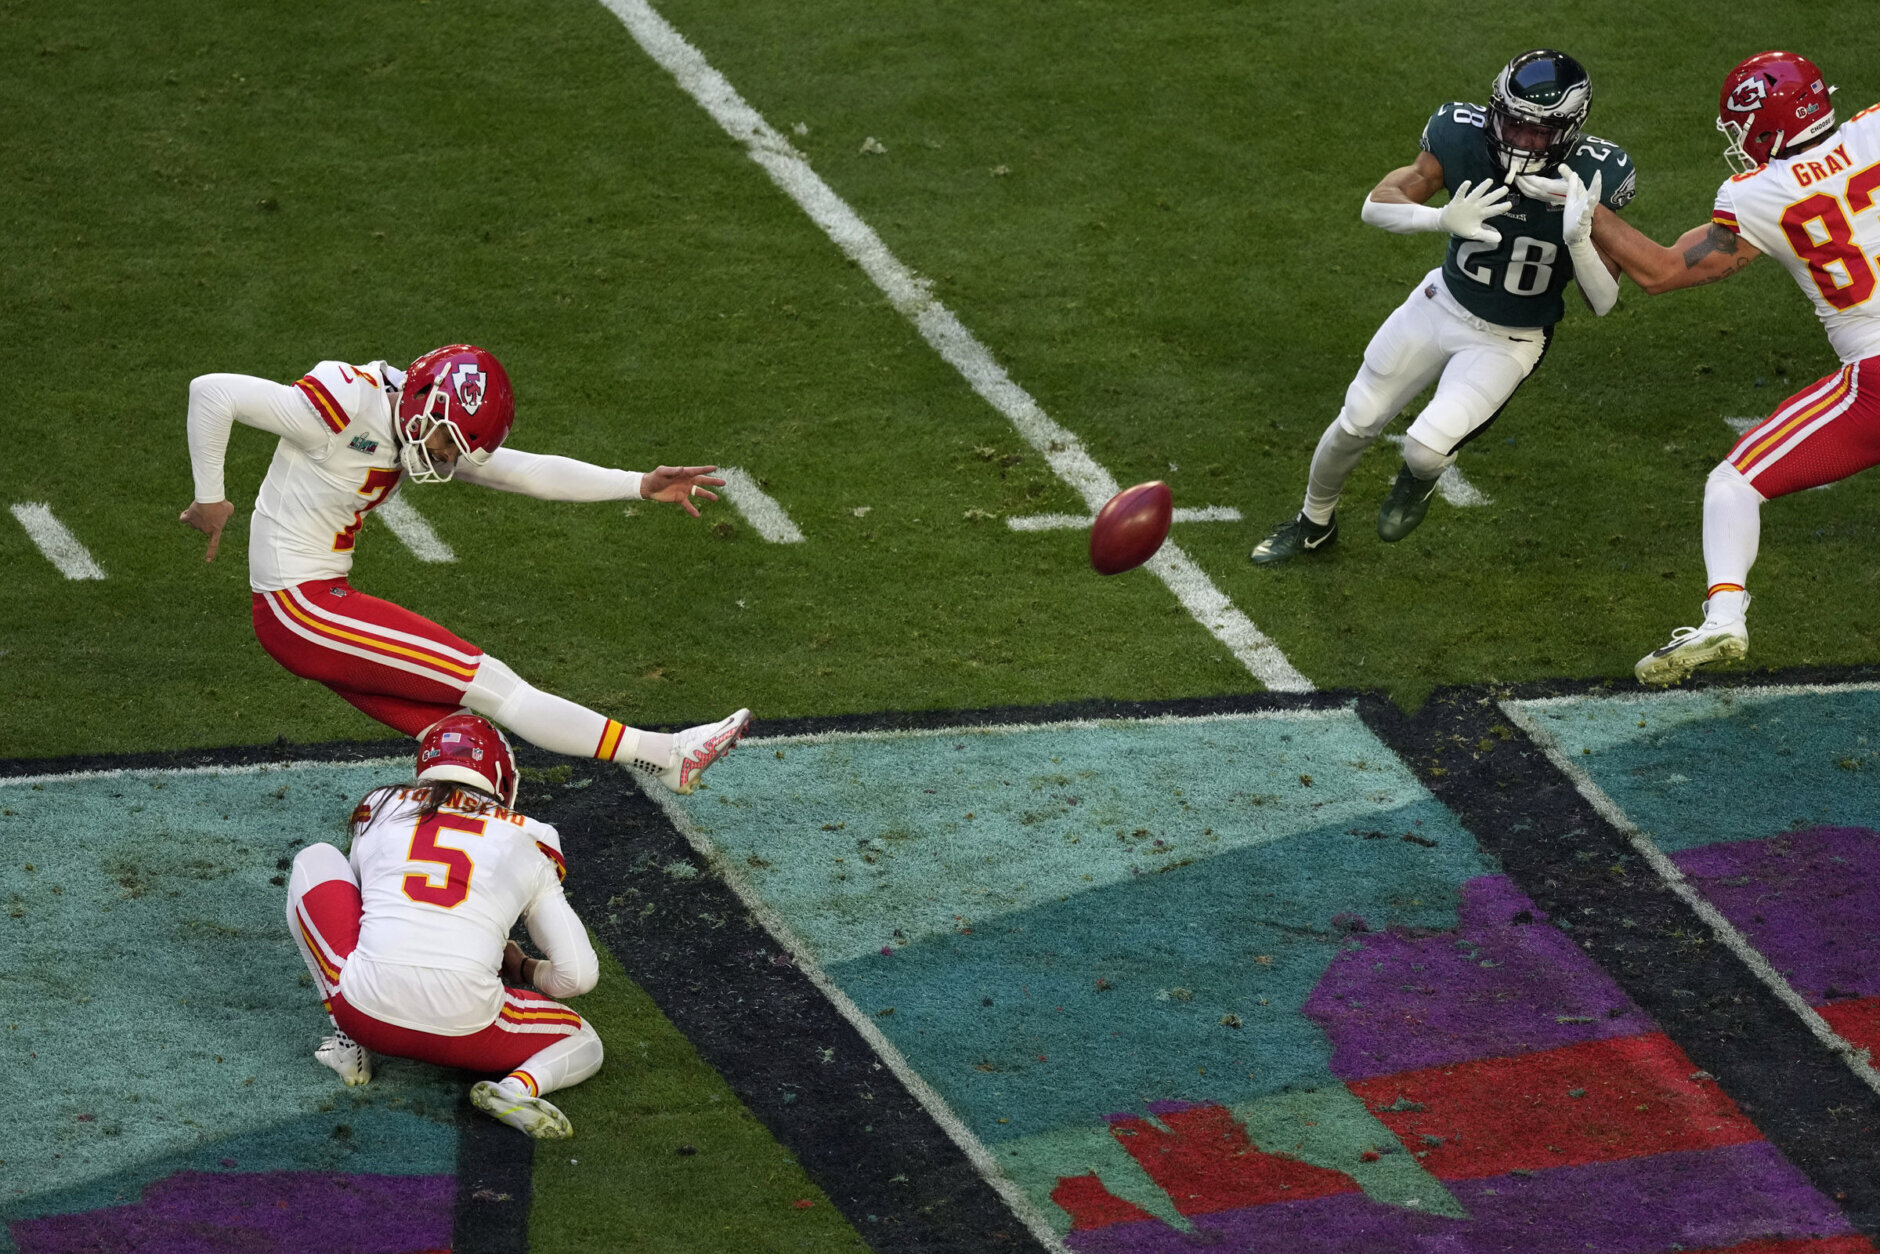 Kansas City Chiefs place kicker Harrison Butker (7) kicks the point after as punter Tommy Townsend (5) holds during the first half of the NFL Super Bowl 57 football game against the Philadelphia Eagles, Sunday, Feb. 12, 2023, in Glendale, Ariz. (AP Photo/Charlie Riedel)